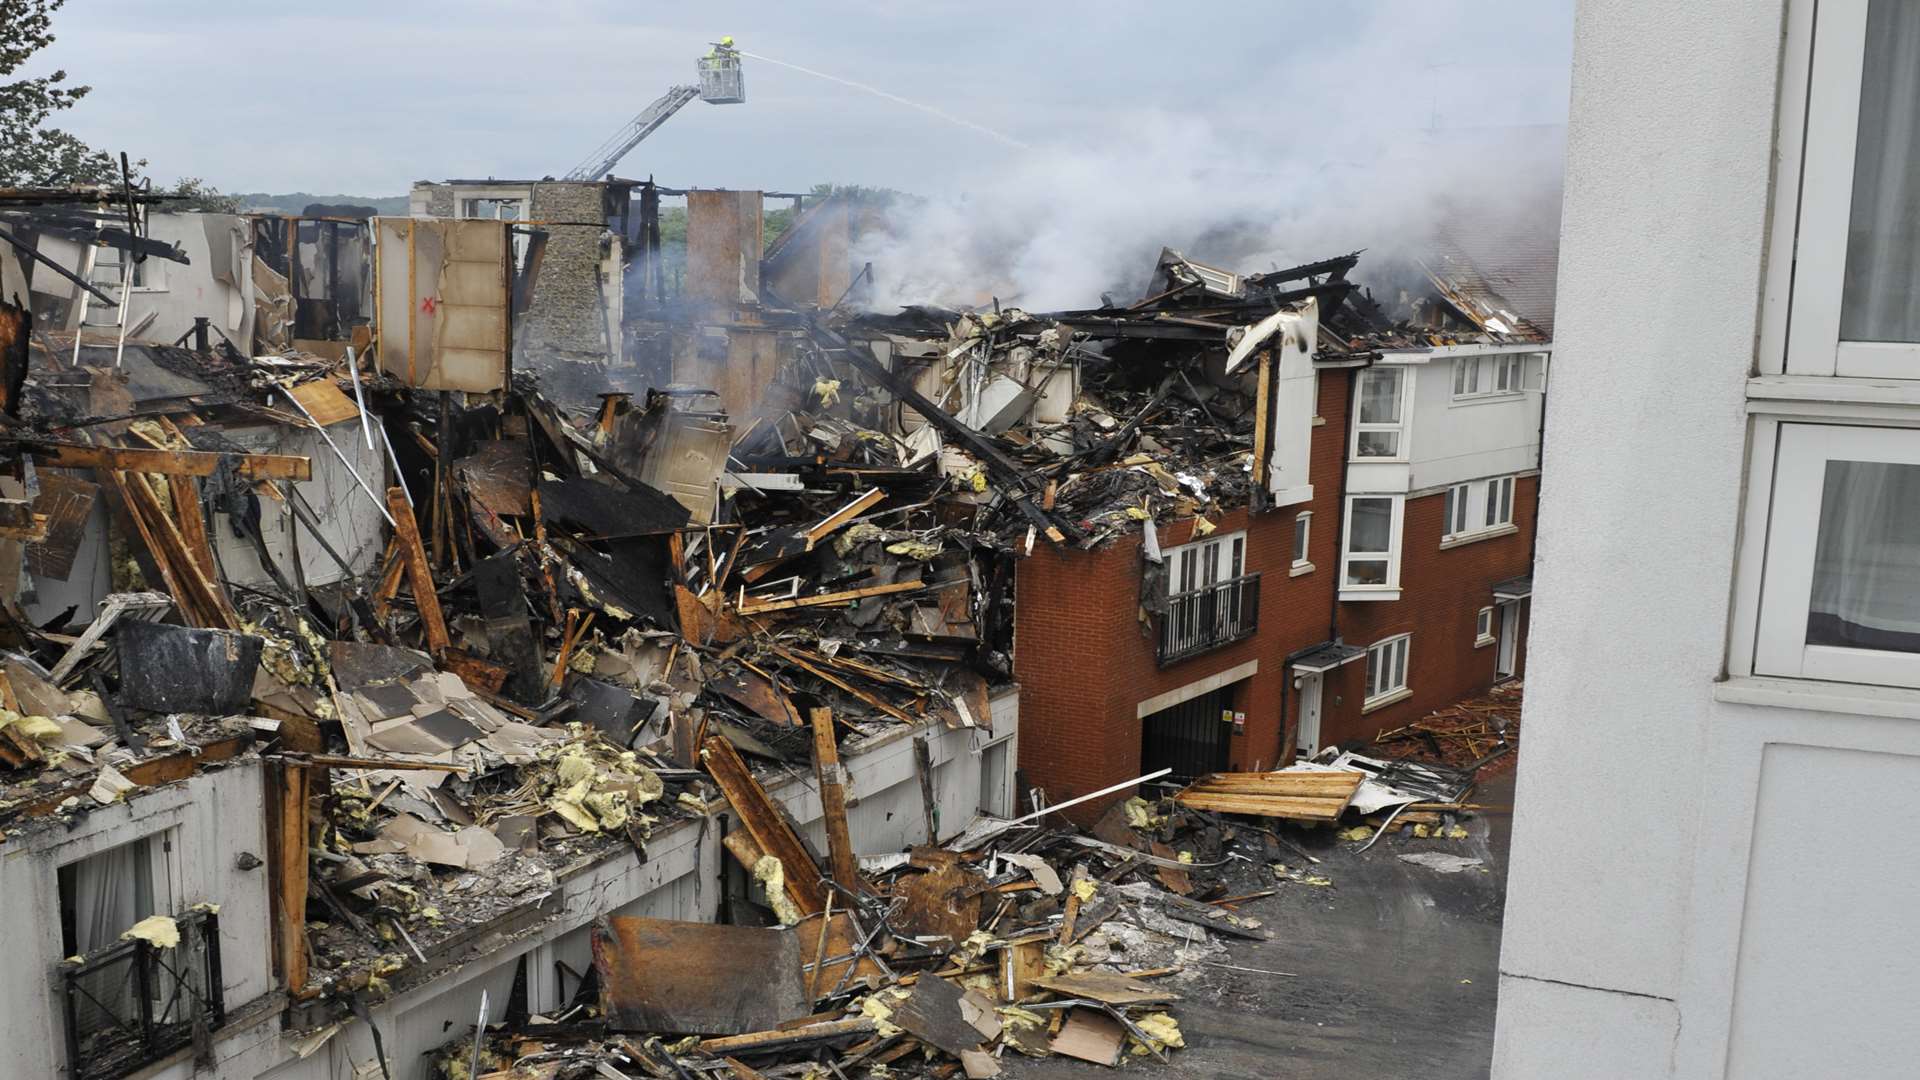 The scene of the fire on the Tannery estate